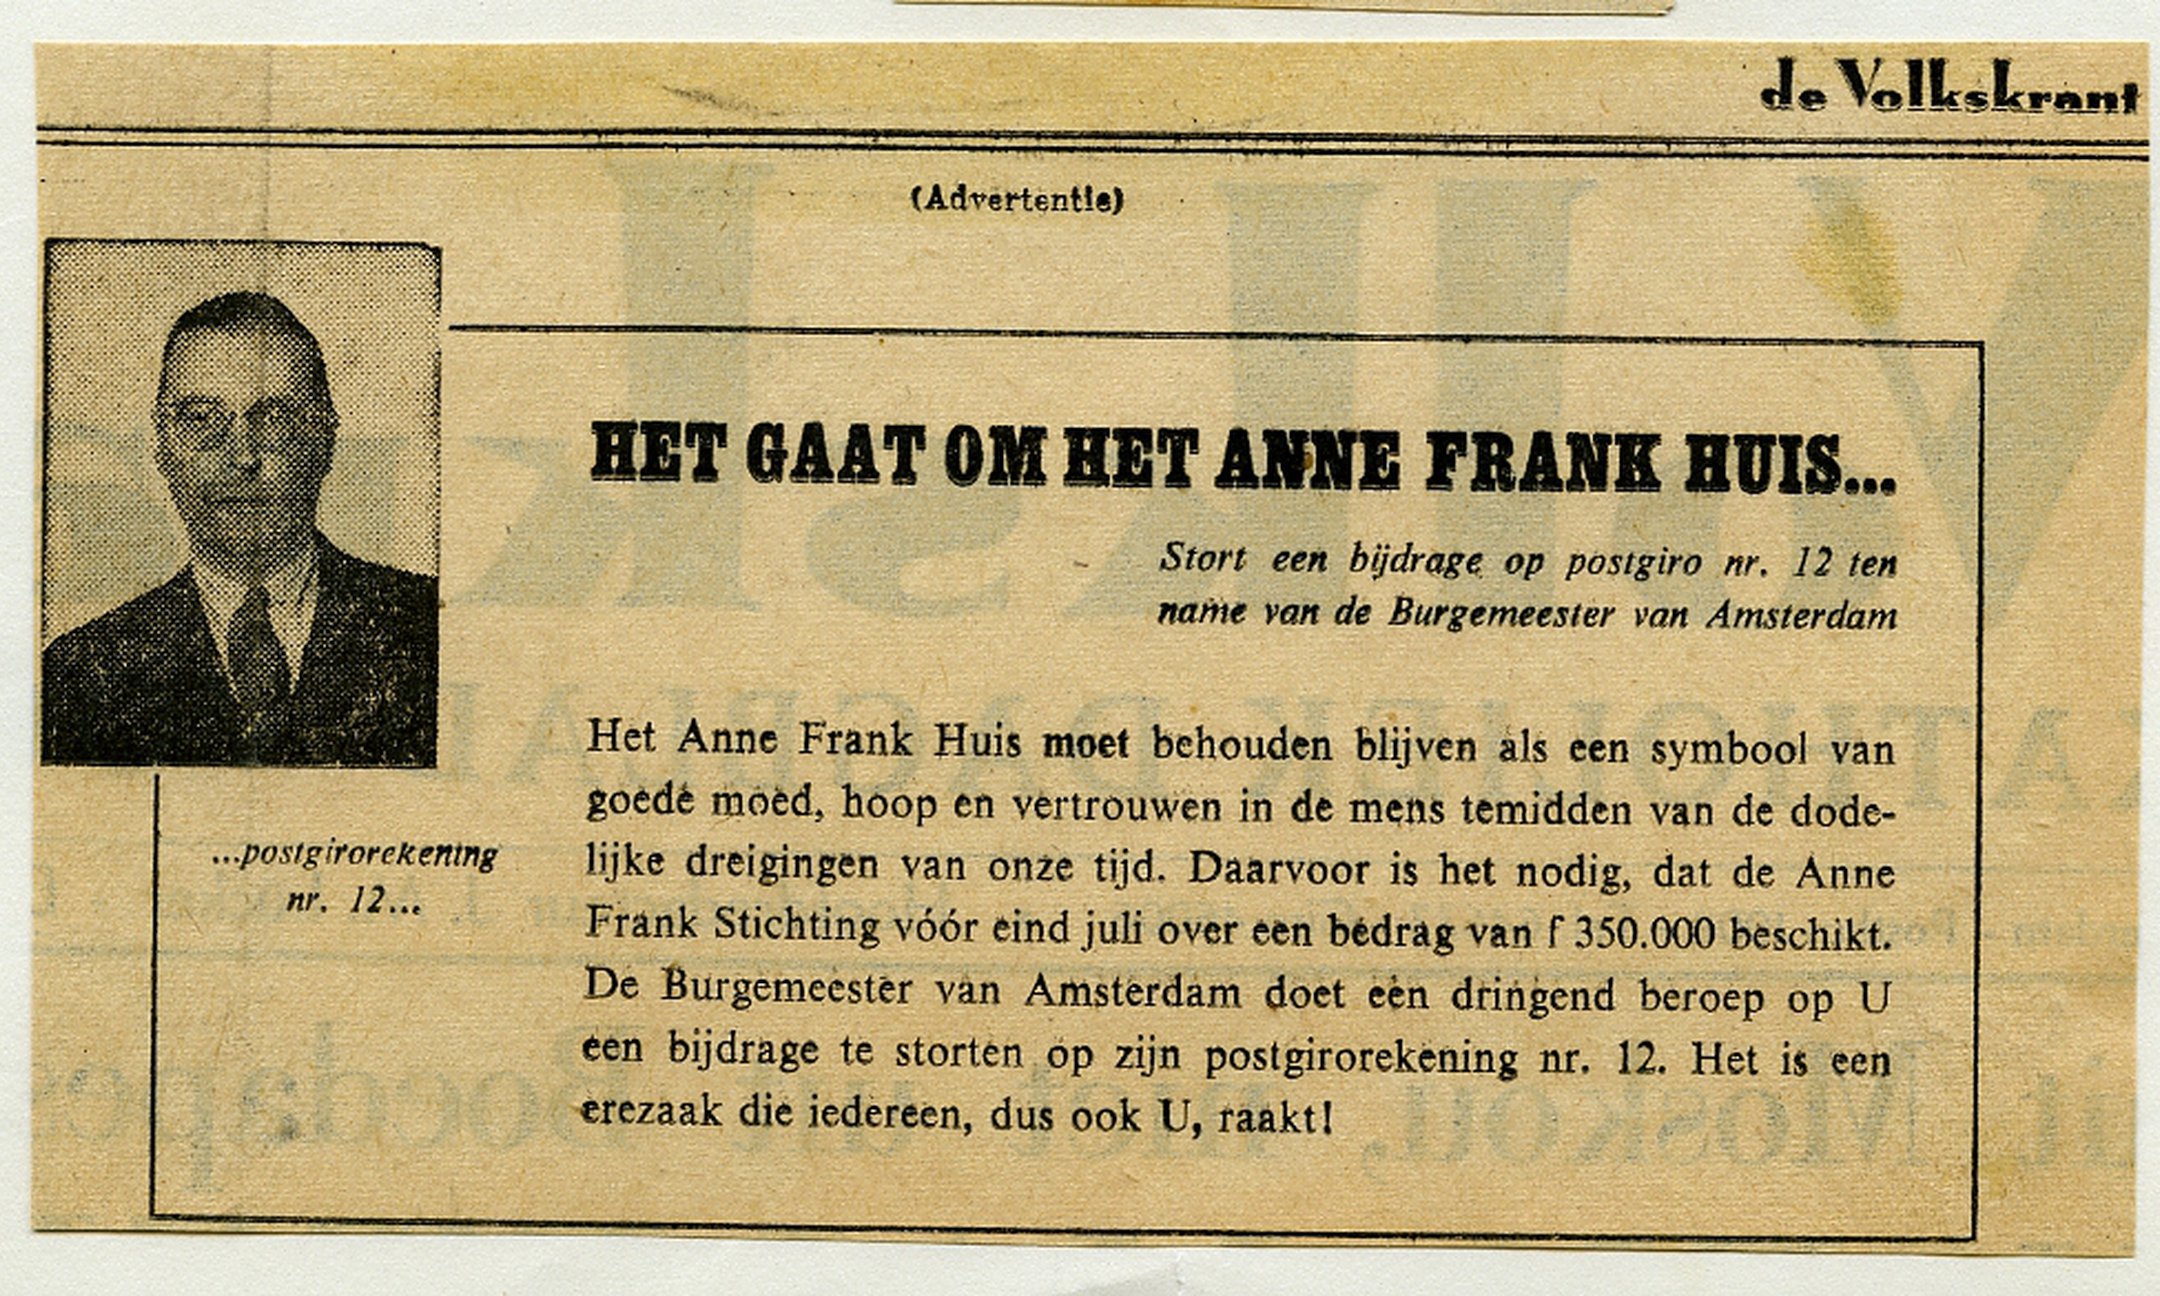 The appeal from Mayor Van Hall to donate money for the preservation of the Anne Frank Stichting